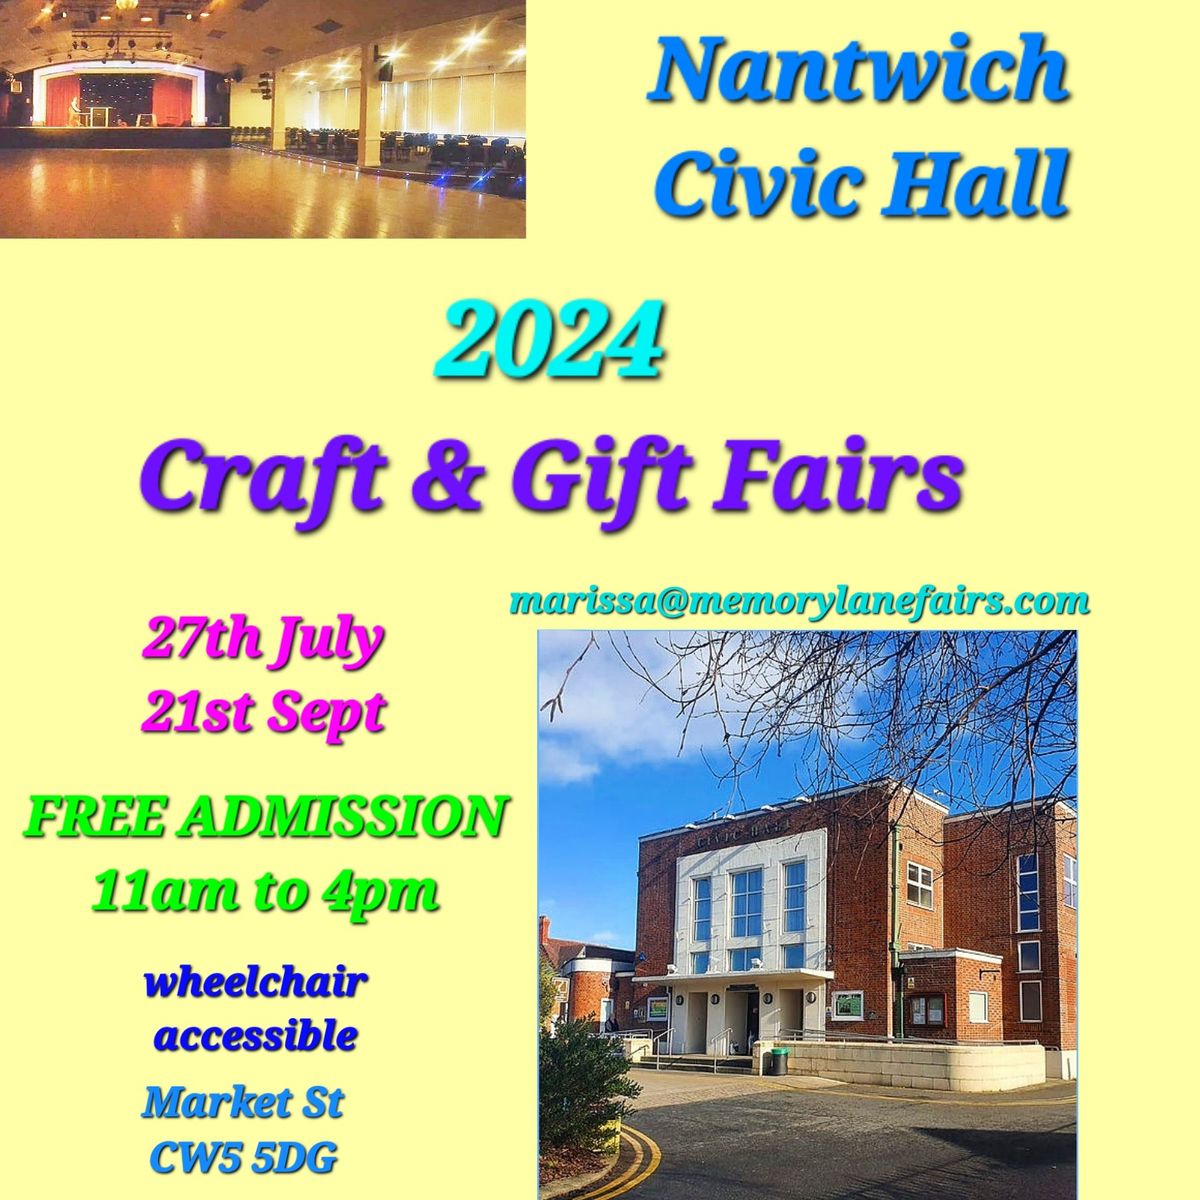 Nantwich Civic Hall Craft and Gift Fair 2024